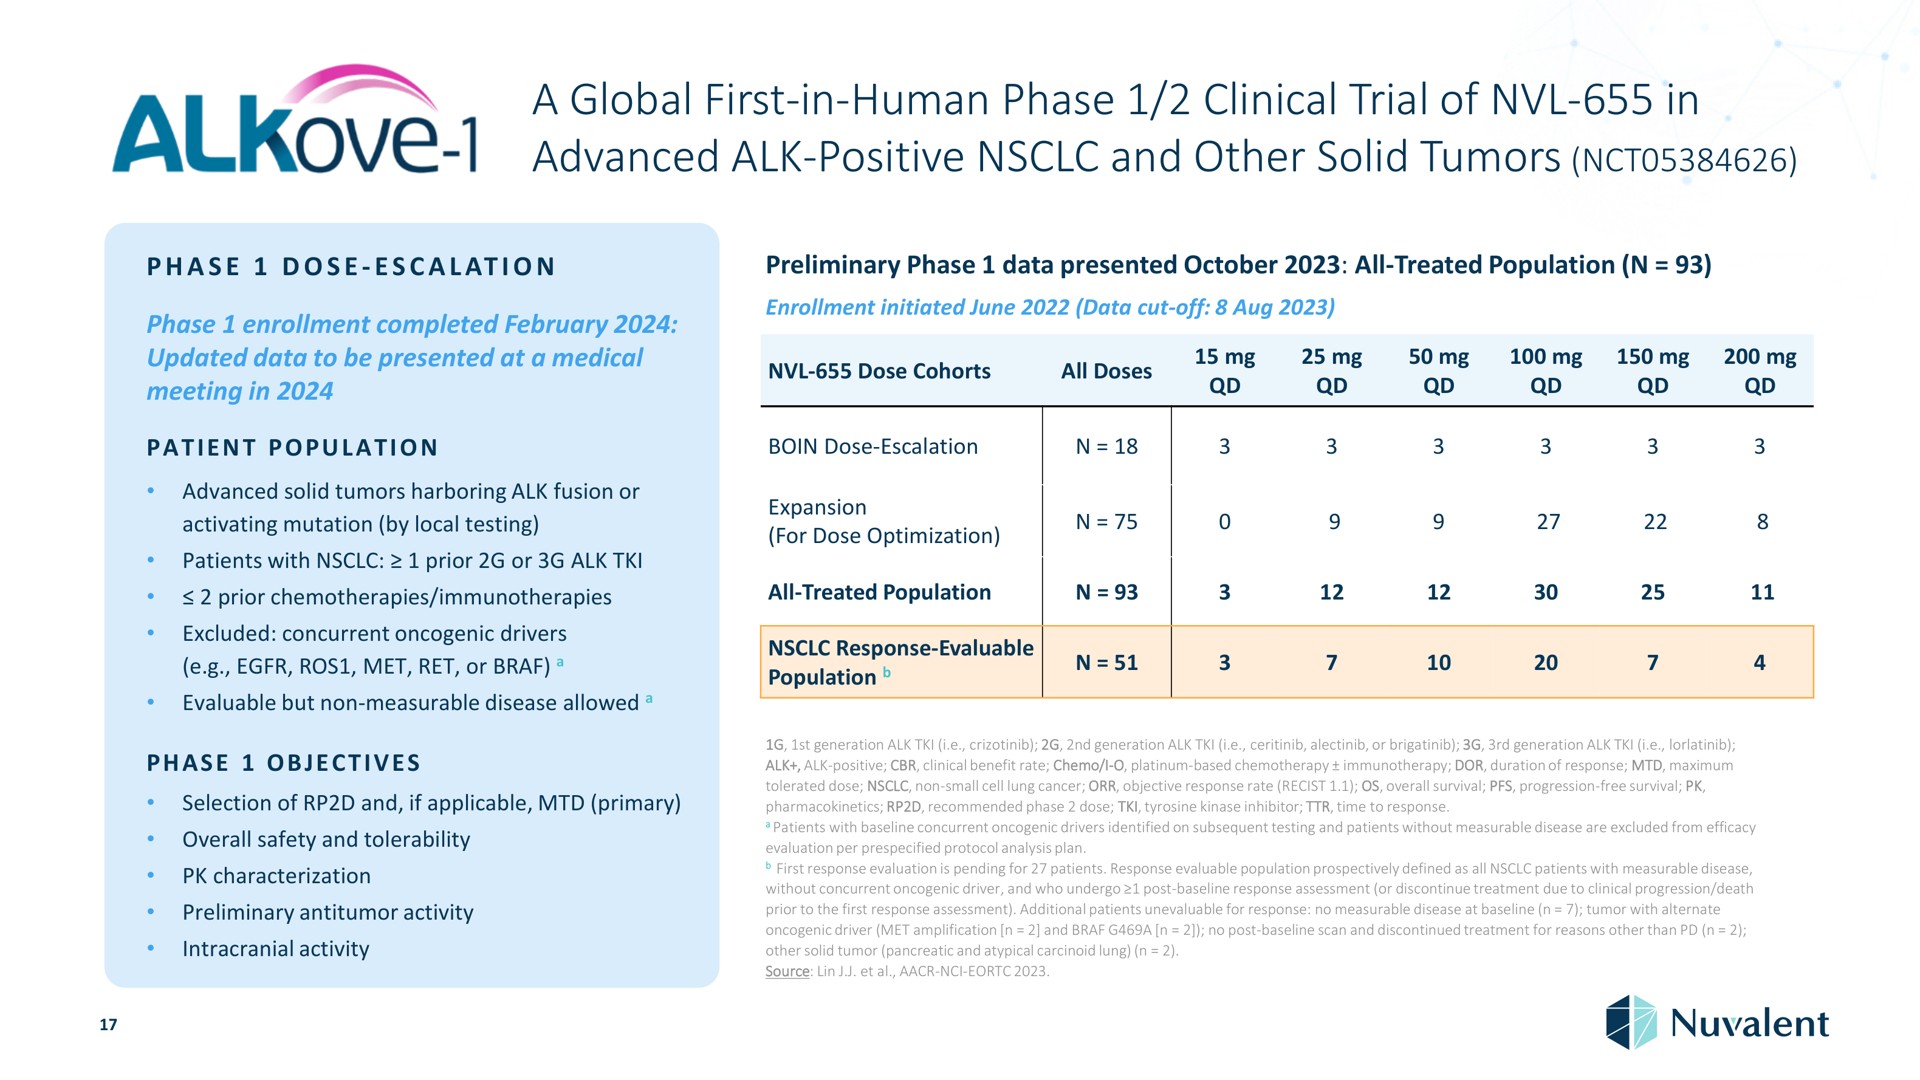 a global first in human phase clinical trial of in advanced alk positive and other solid tumors dose preliminary data presented all treated population enrollment completed updated data to be presented at medical meeting enrollment initiated june data cut off dose cohorts all doses patient population dose harboring alk fusion or activating mutation by local testing patients with prior or alk for dose optimization prior chemotherapies all treated population excluded concurrent drivers met ret or evaluable but non measurable disease allowed response evaluable population objectives selection if applicable primary overall safety tolerability characterization preliminary activity intracranial activity on alk clinic non generation alk i rate i platinum base dor duration response maximum cancer objective survival progression free survival with cor evaluation per first response me to response evaluable population prospectively defined as all patients with at tumor scan discontinued treatment for reasons than tumor tic atypical carcinoid lung source lin | Nuvalent